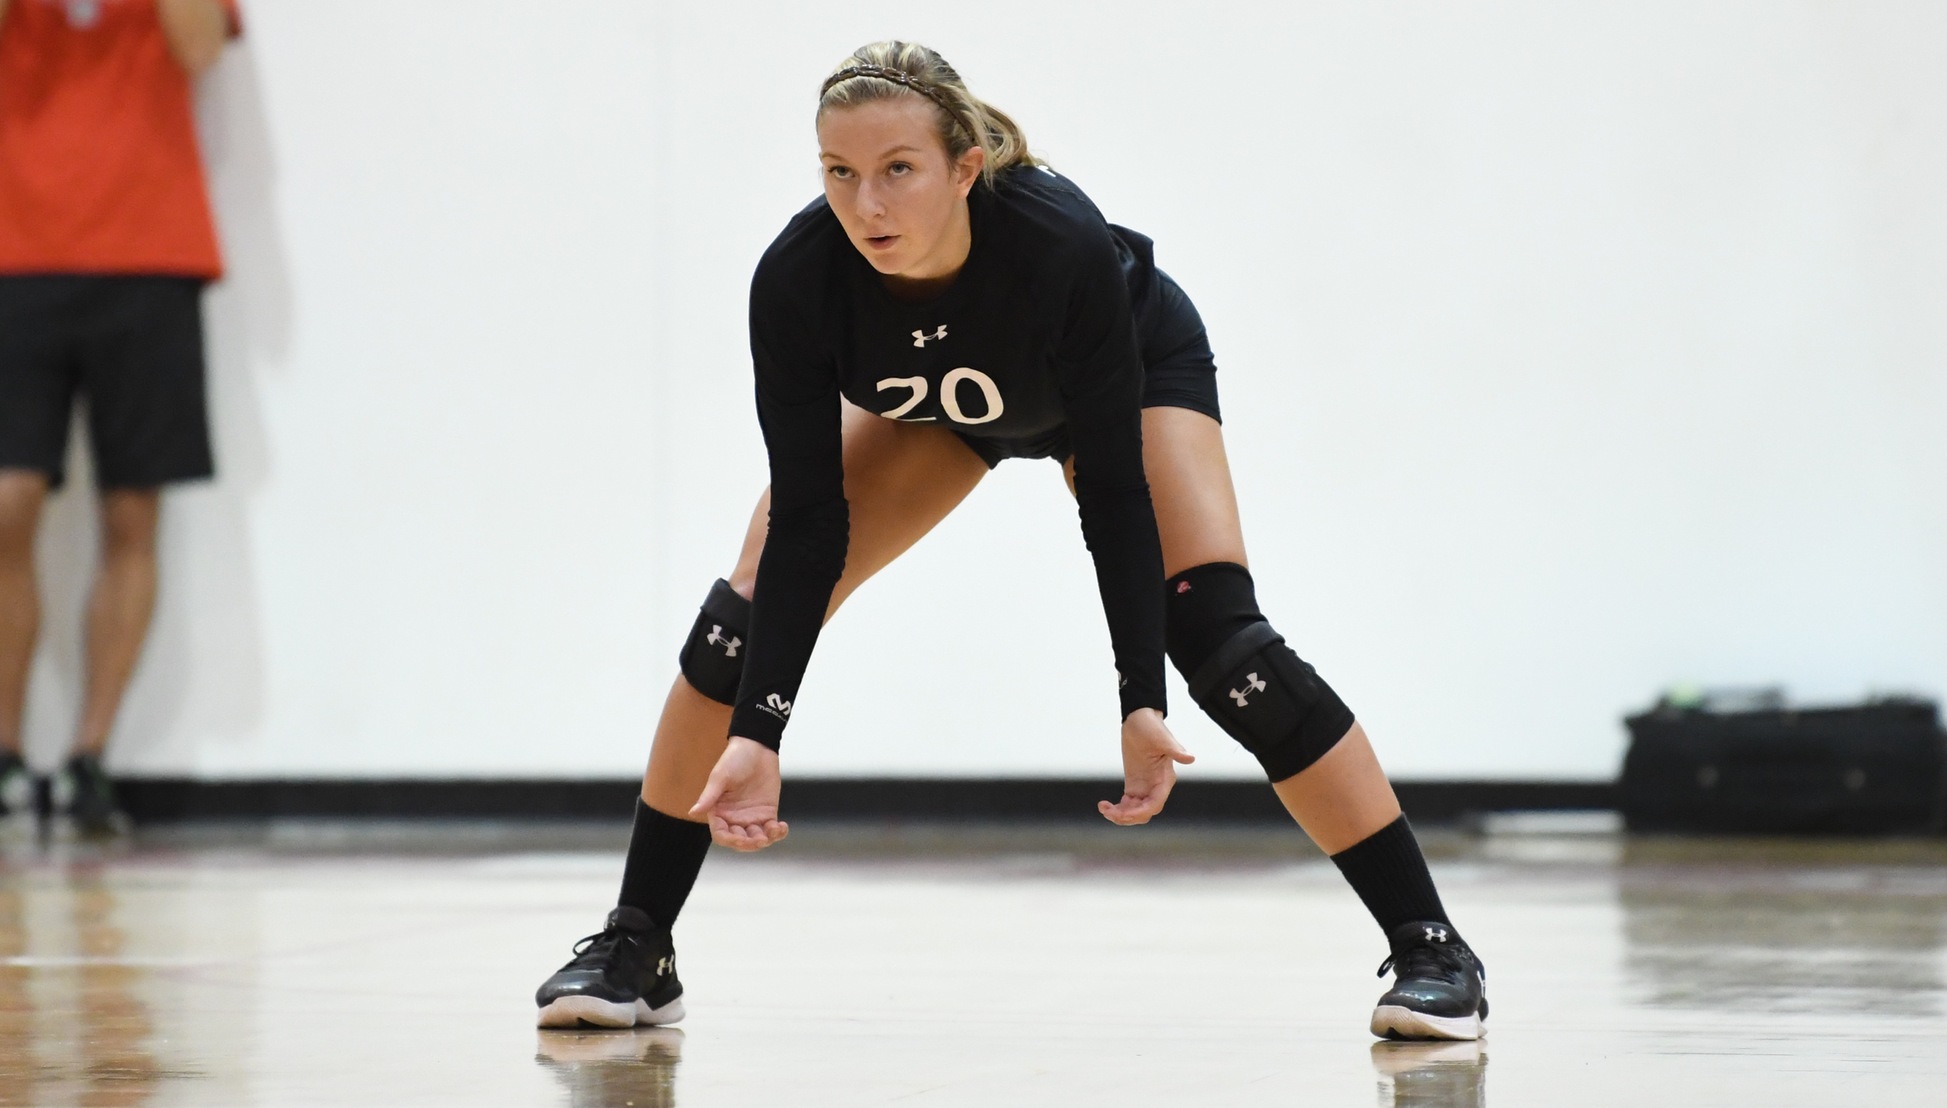 Junior libero Taylor Yontz logged 21 digs to lead the 4th-ranked Tigers in a 3-1 win over No. 8 Ithaca to open play in the Wittenberg Fall Classic